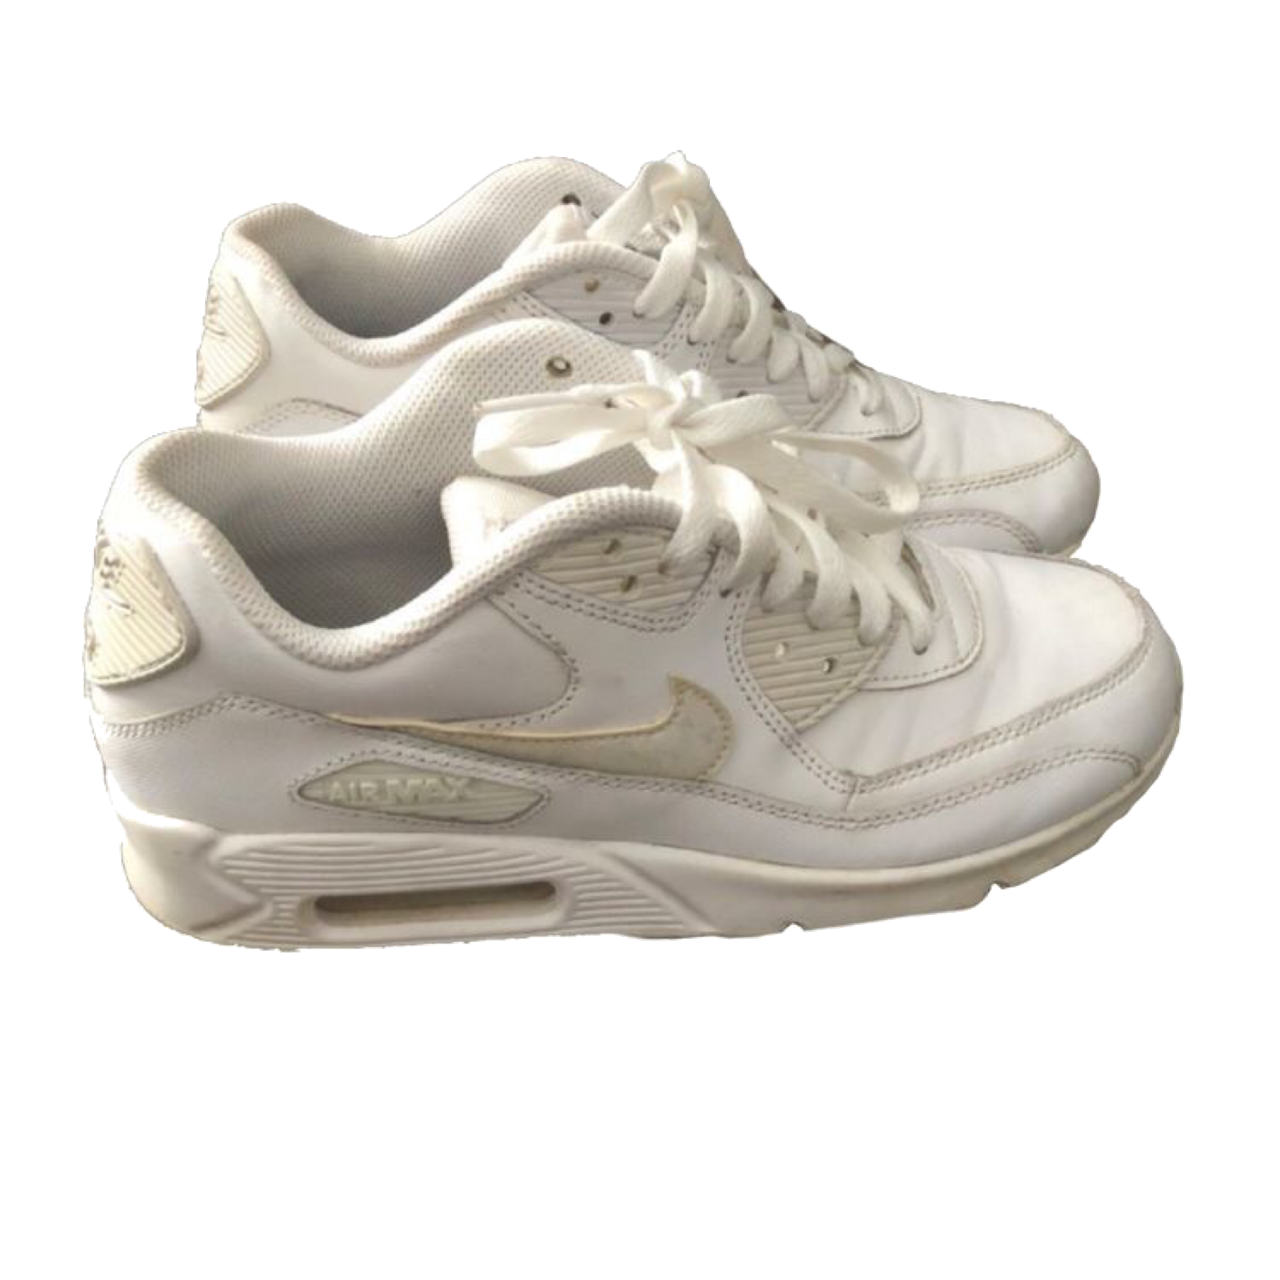 Nike Shoes PNG Image HD